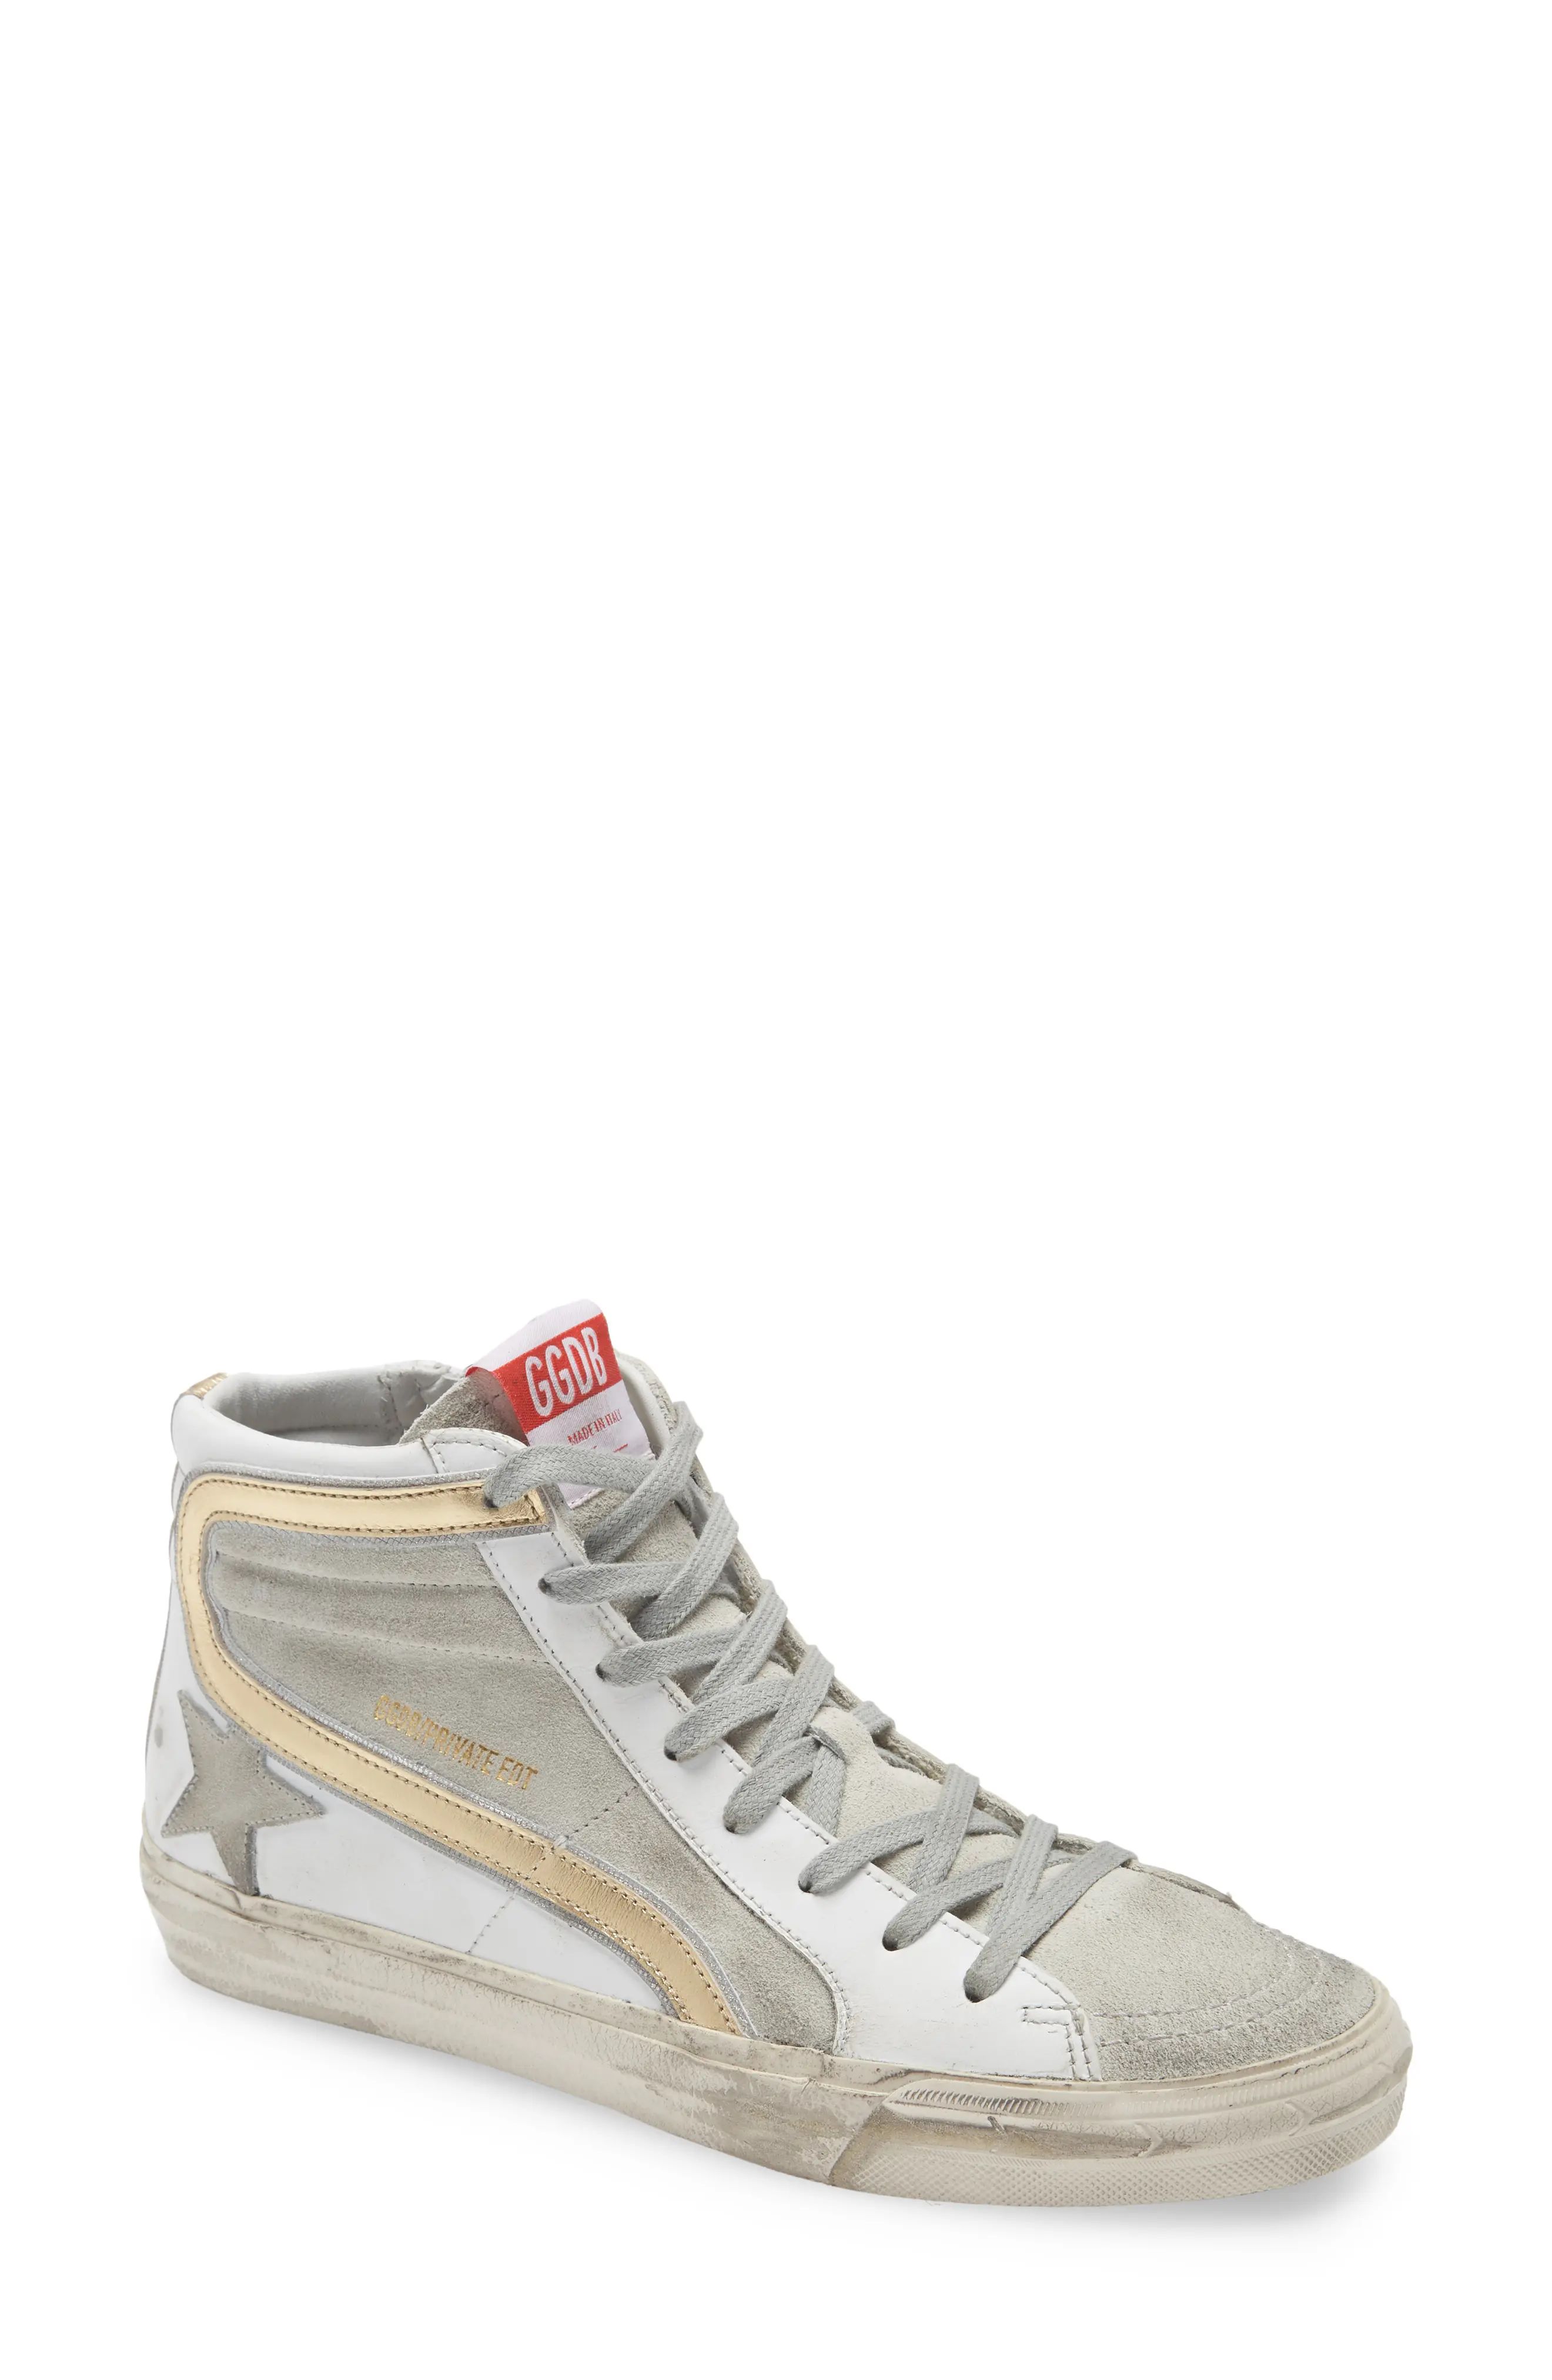 Golden Goose Slide High Top Sneaker in White Leather/Ice Suede at Nordstrom, Size 11Us | Nordstrom